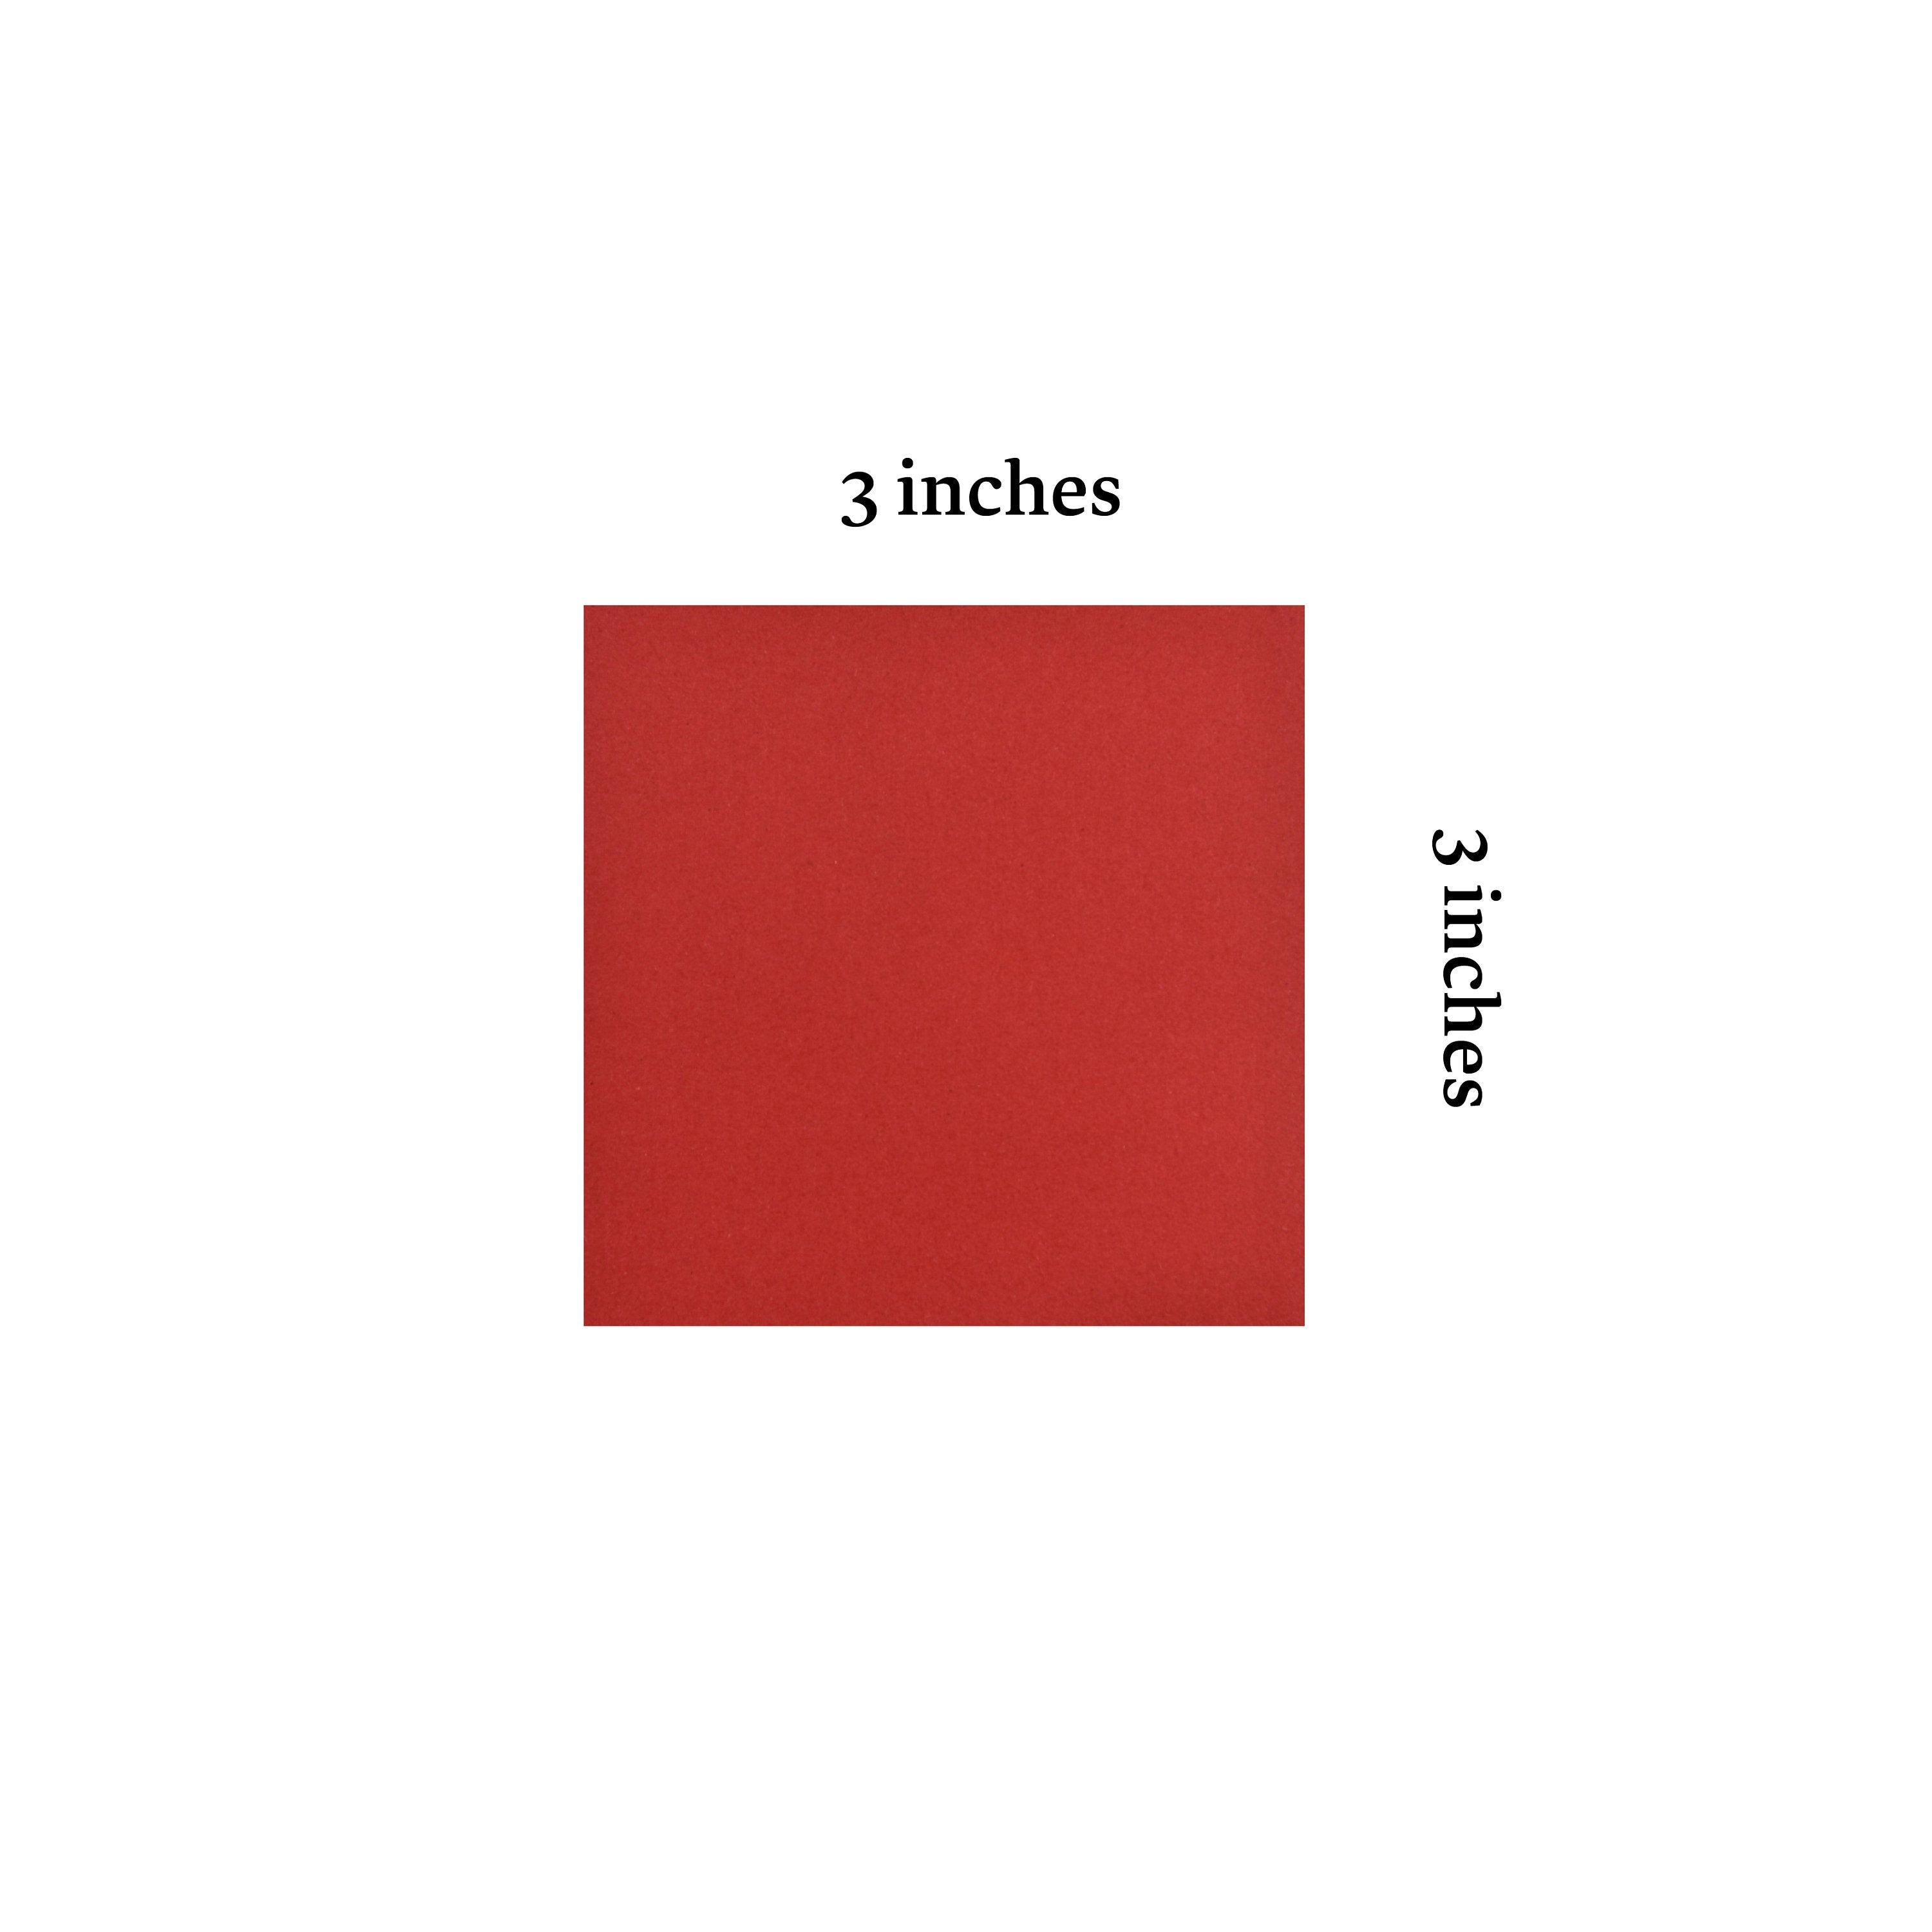 100 Red Origami Paper Sheets 3x3 inches Square Paper Pack S16